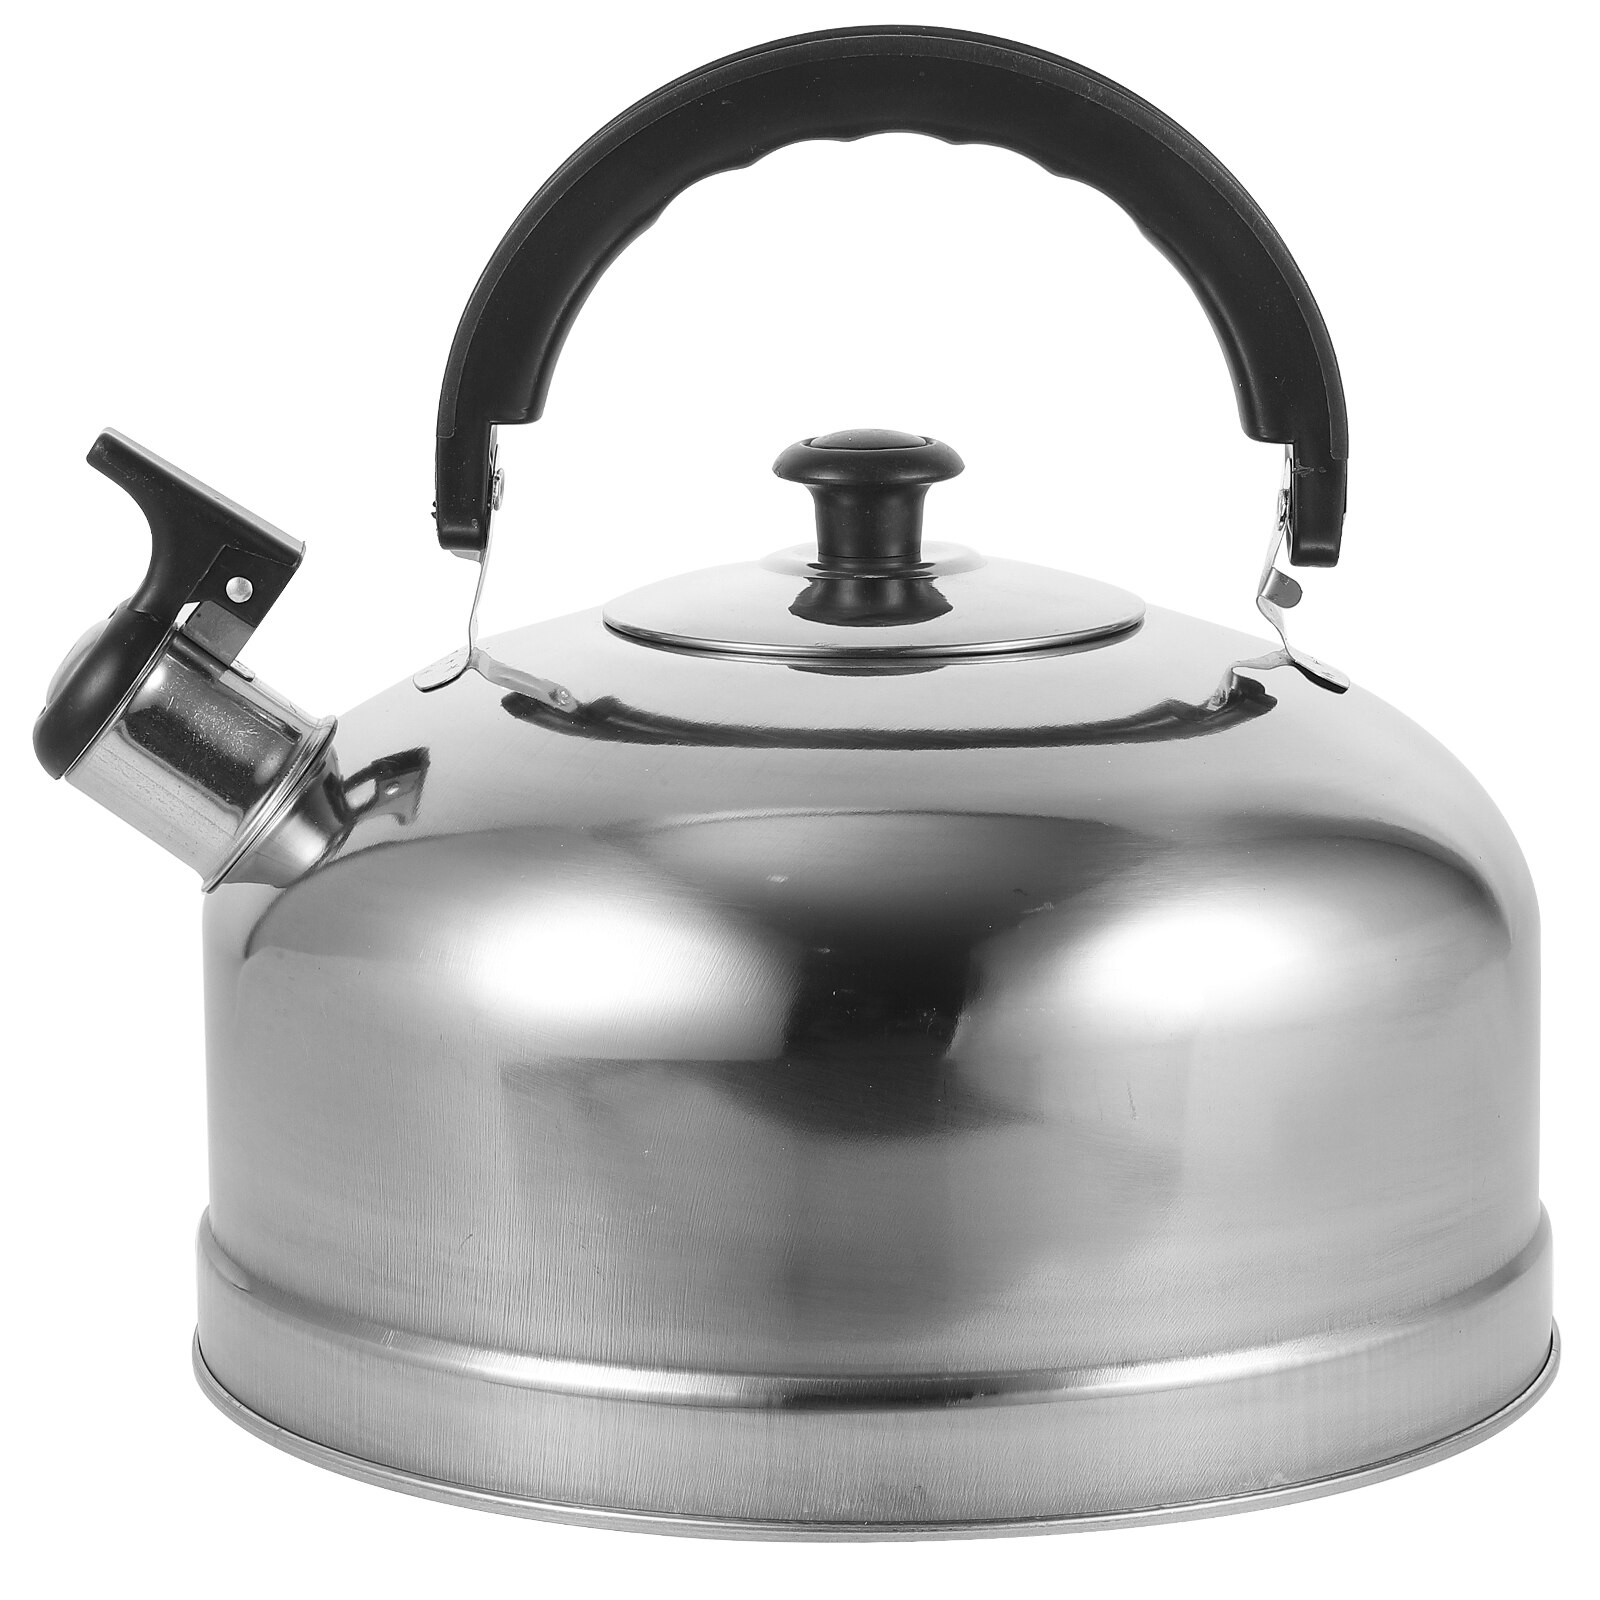 Teapot Whistling Coffee Pot Gas Stove Teakettle Metal Water Jug Heating Kettle Stovetop Safe Kettle Gas Heater Indoor